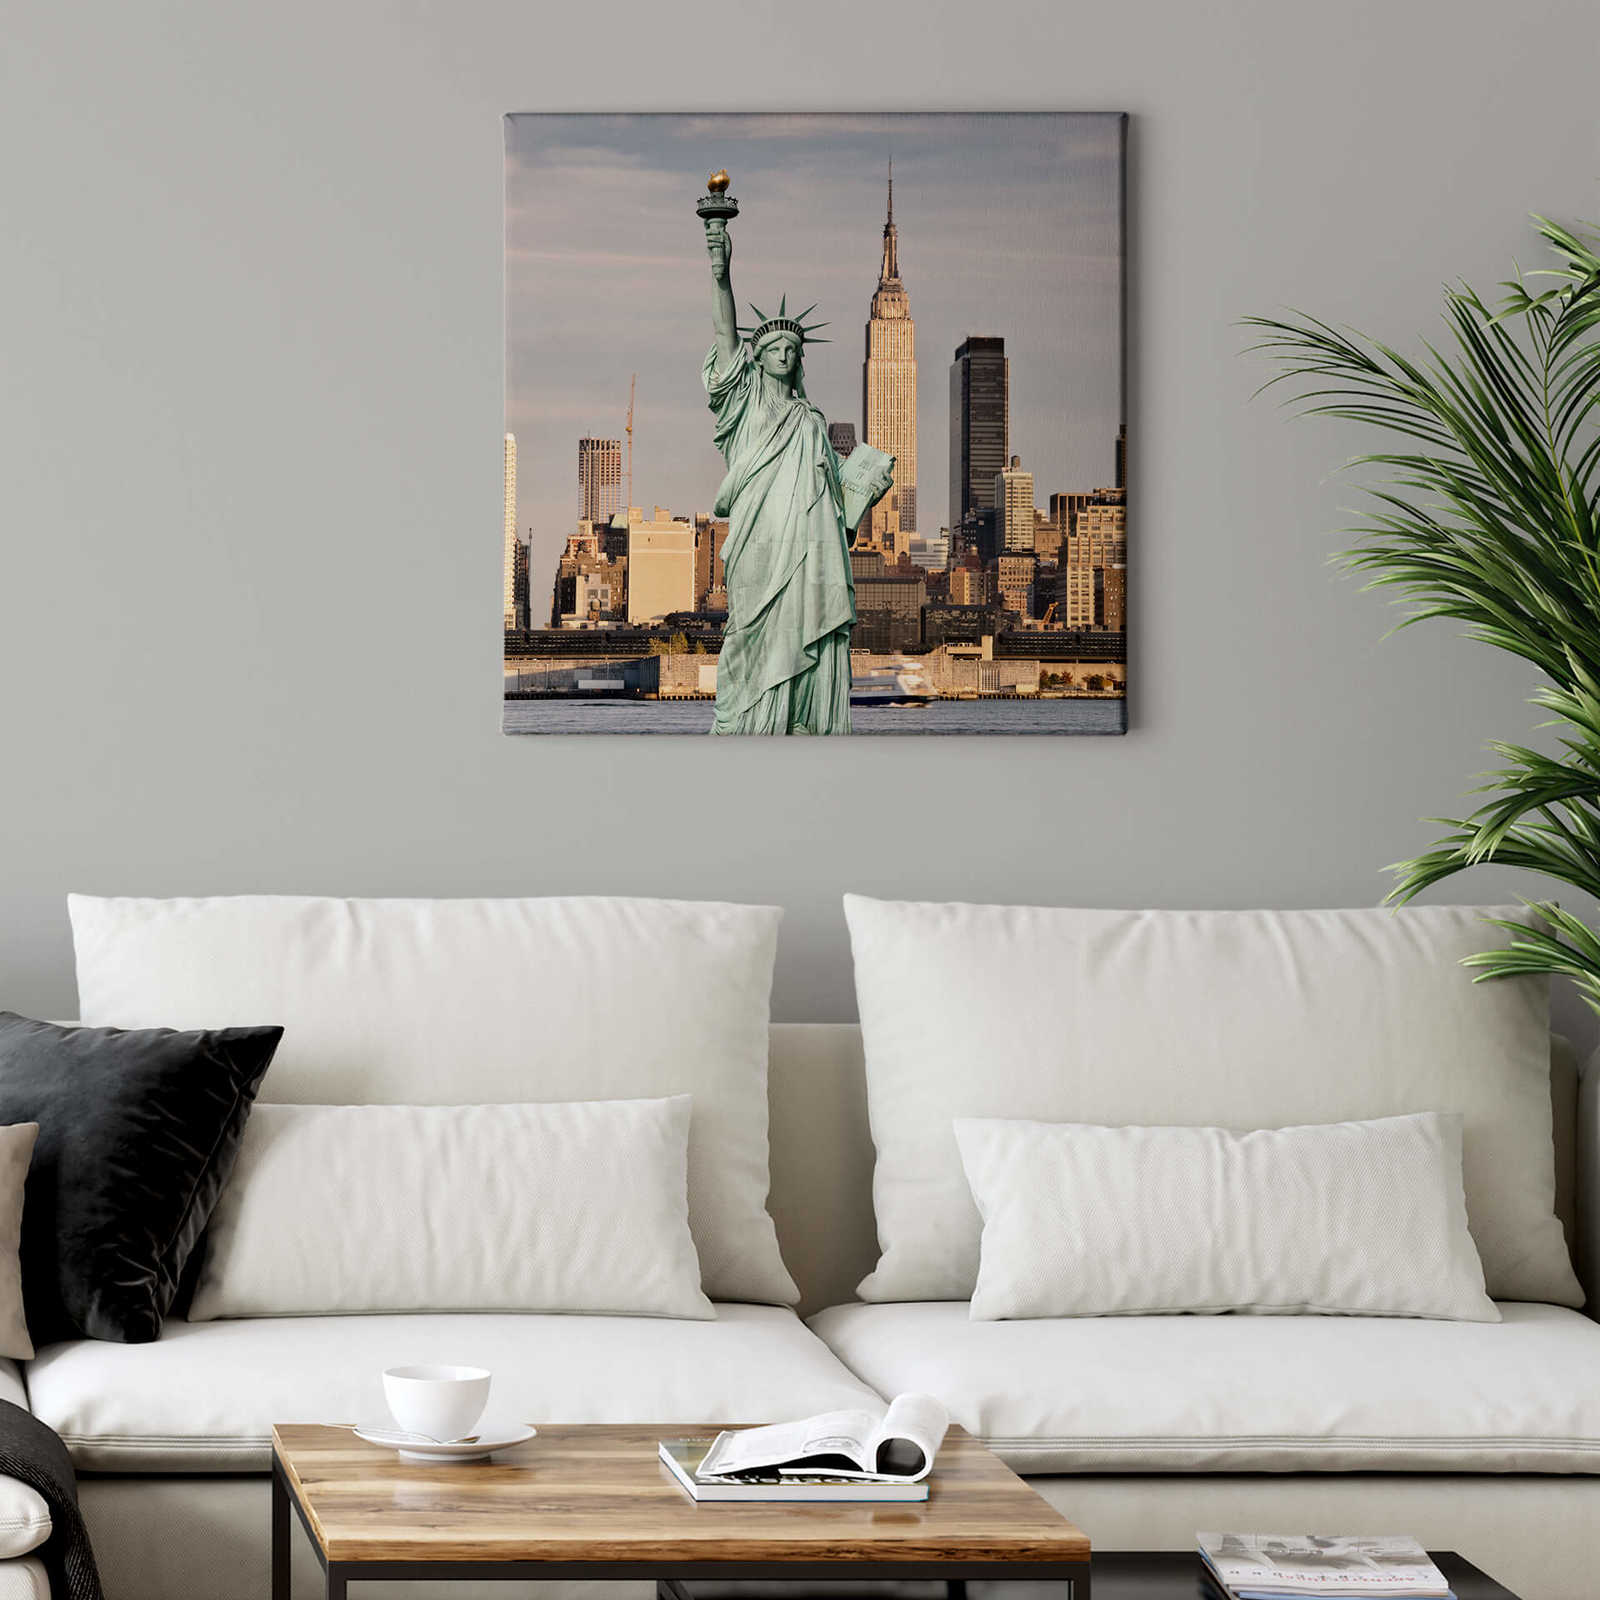             Square canvas picture Statue of Liberty , New York
        